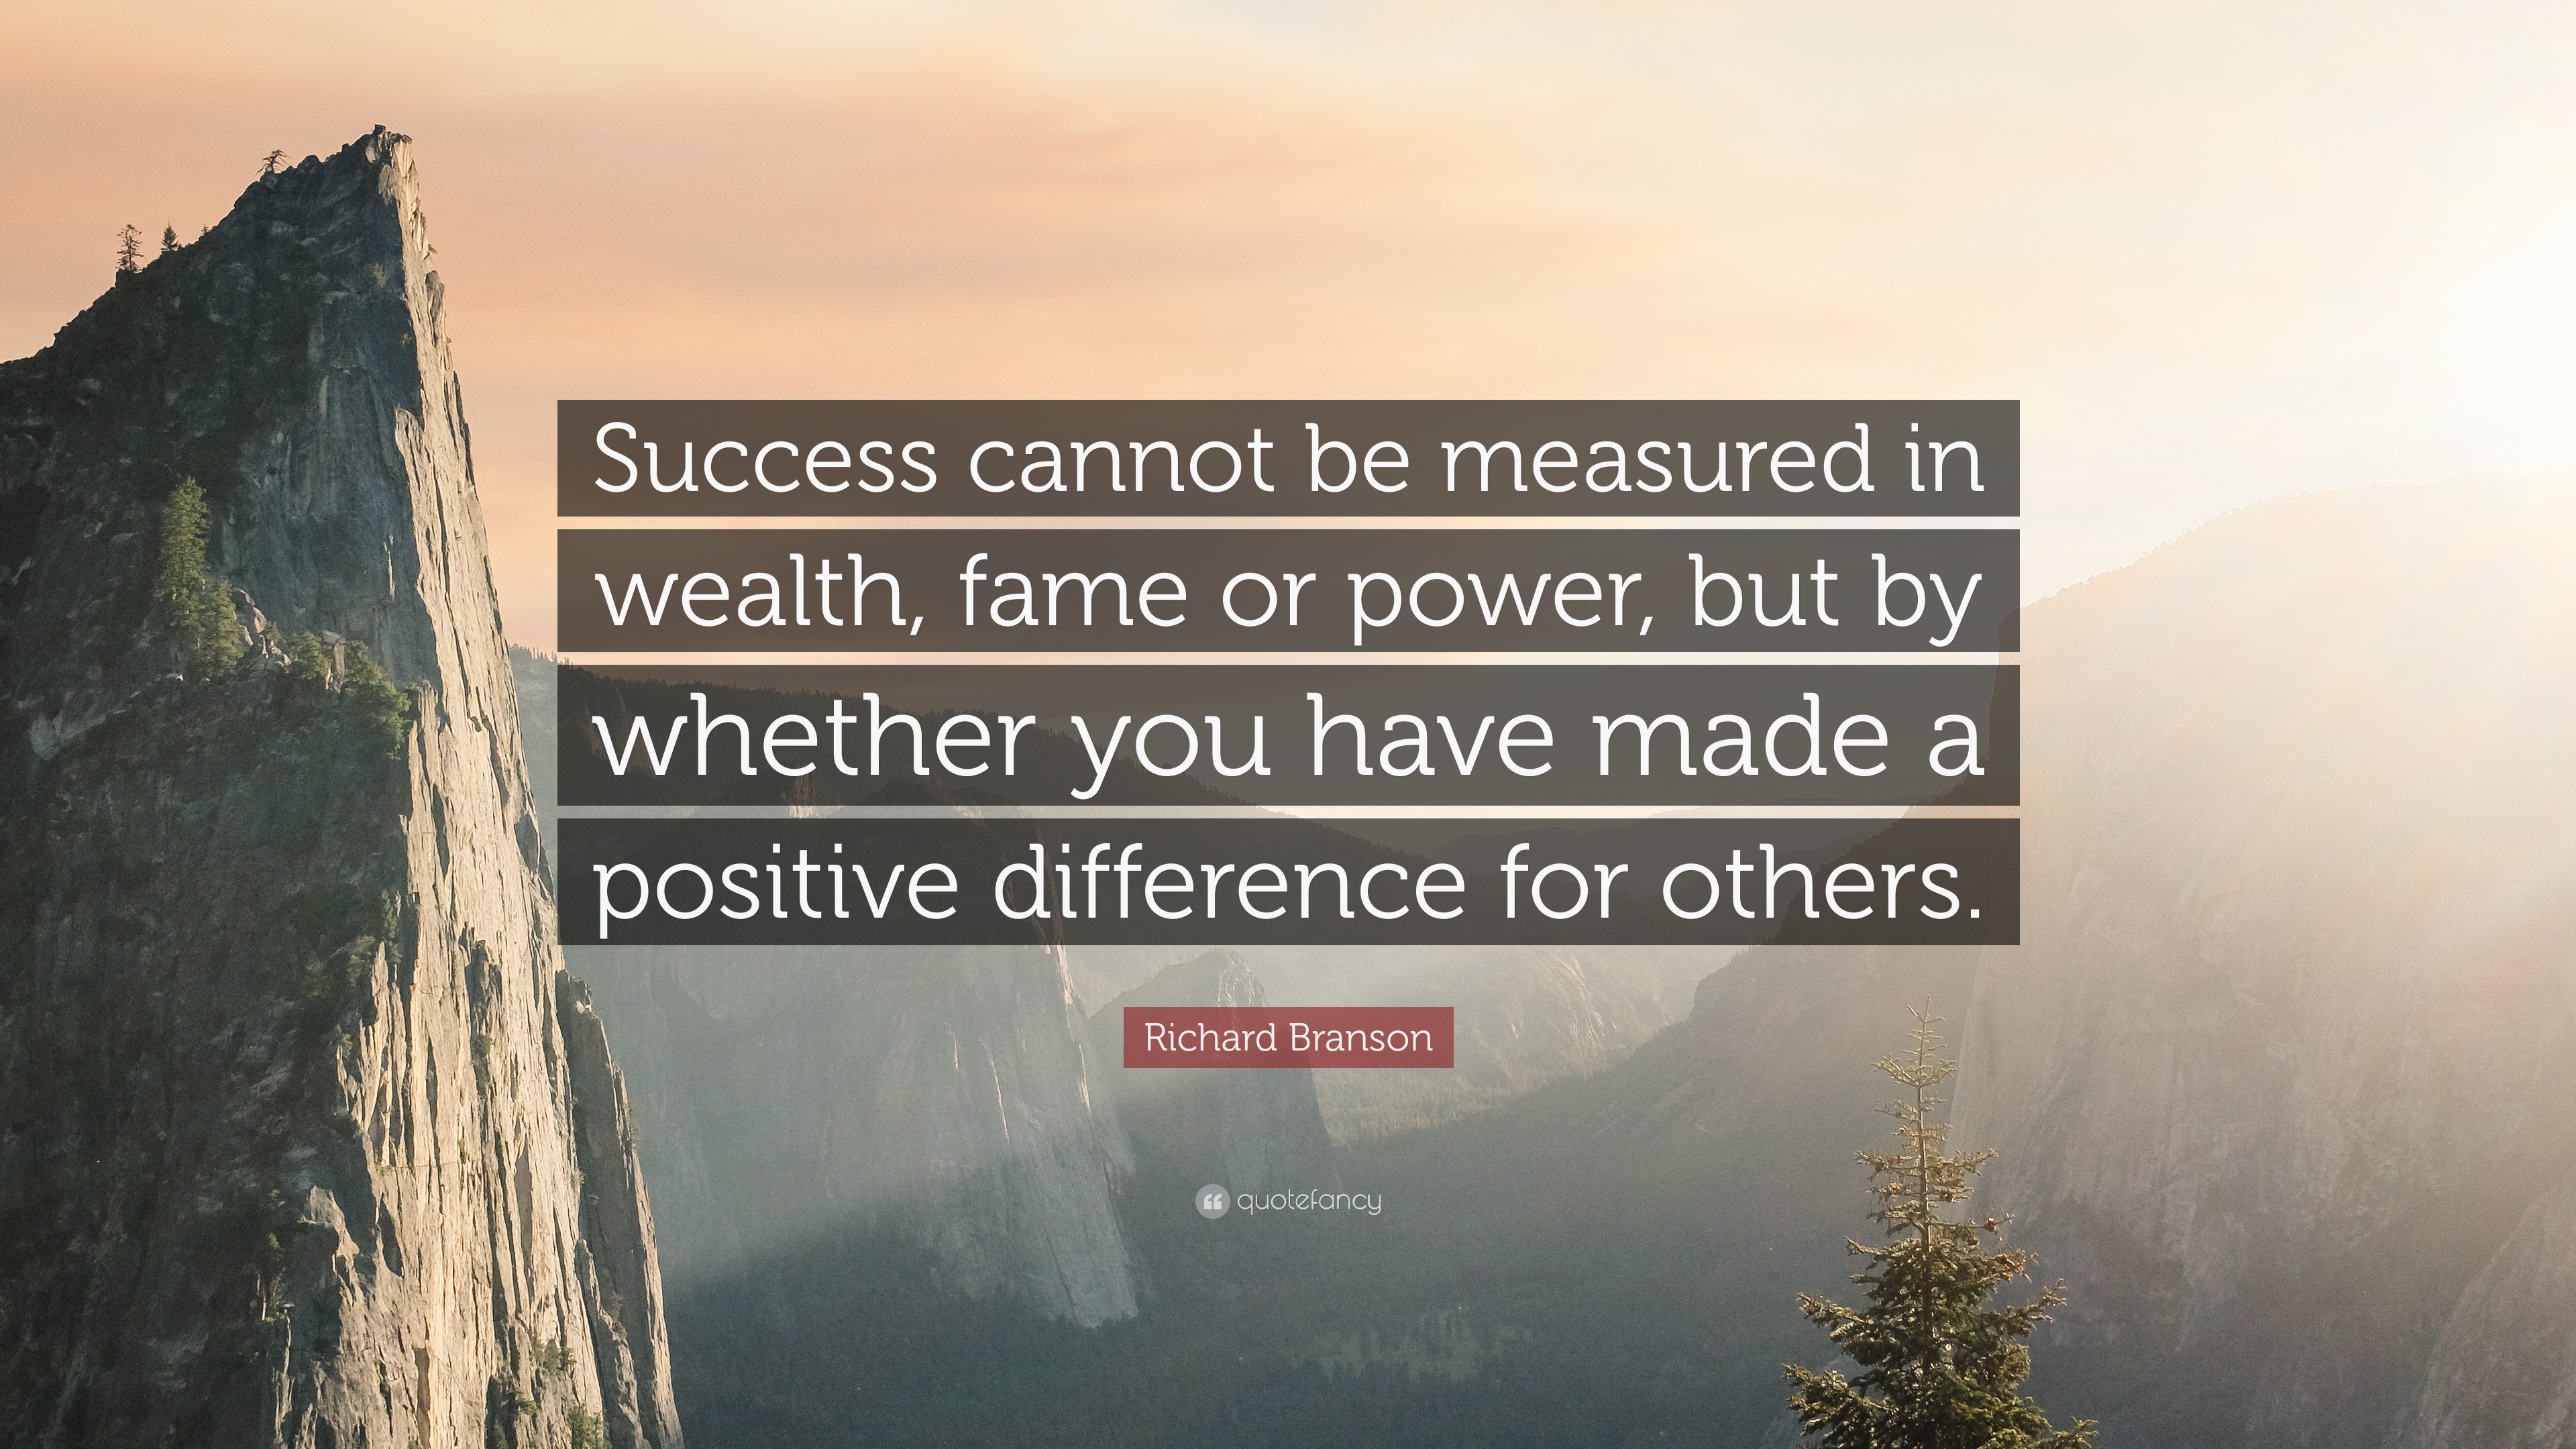 Richard Branson Quote: “Success cannot be measured in wealth, fame or  power, but by whether you